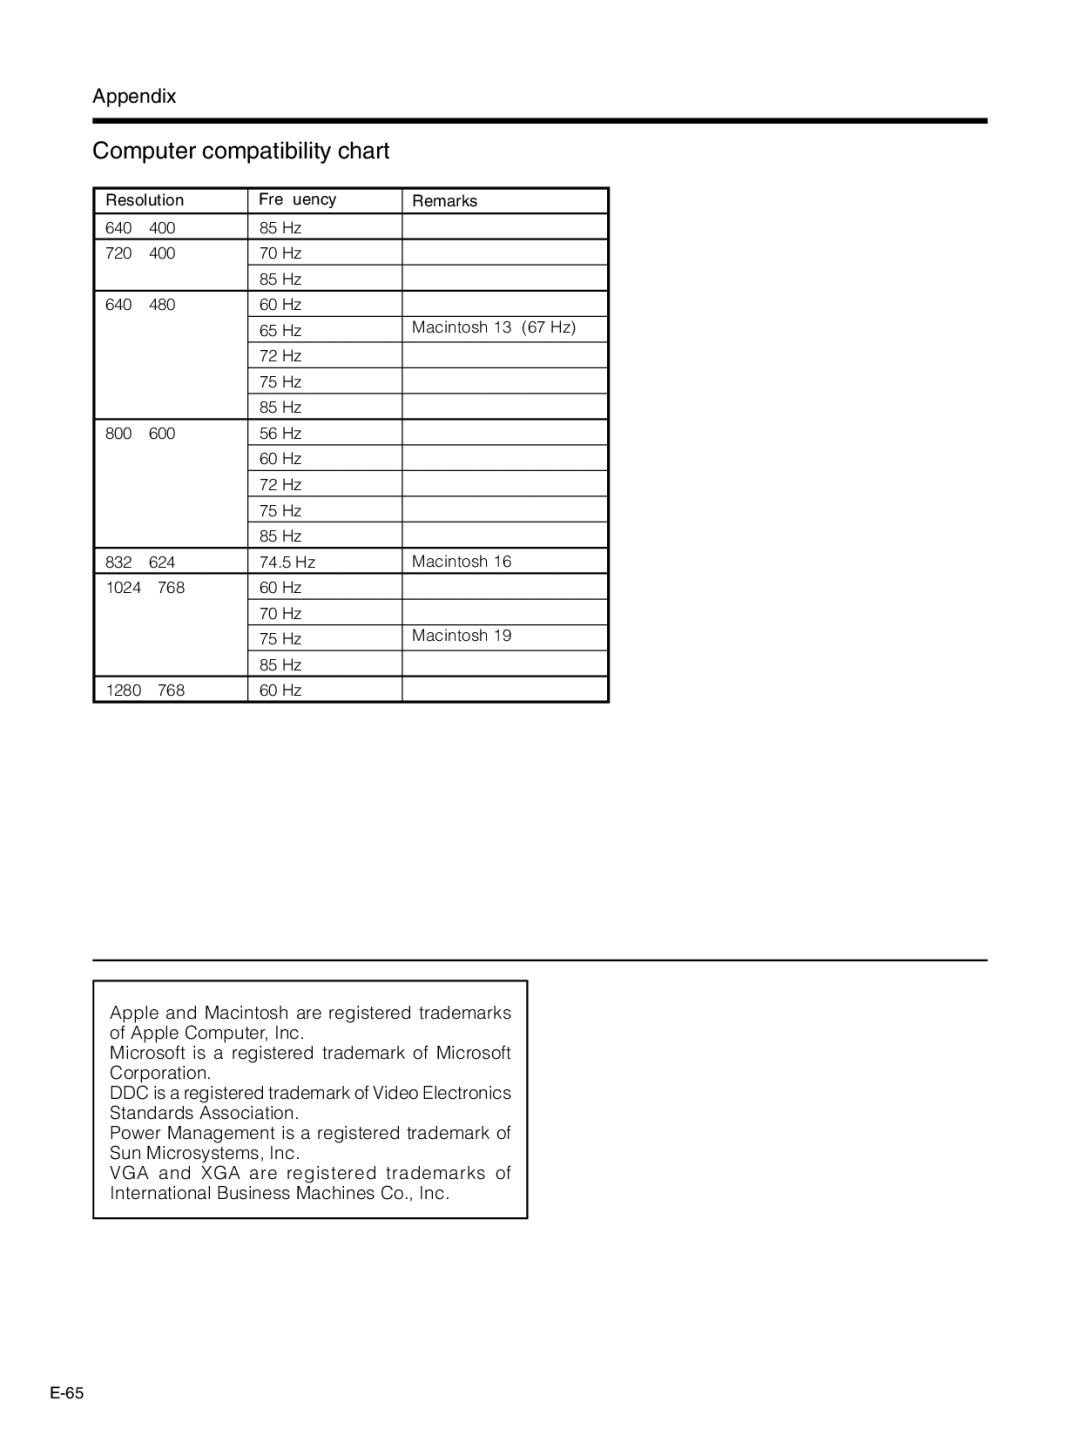 Pioneer PDP-5030HD, PDP-4330HD manual Computer compatibility chart, Appendix, Resolution Frequency Remarks 